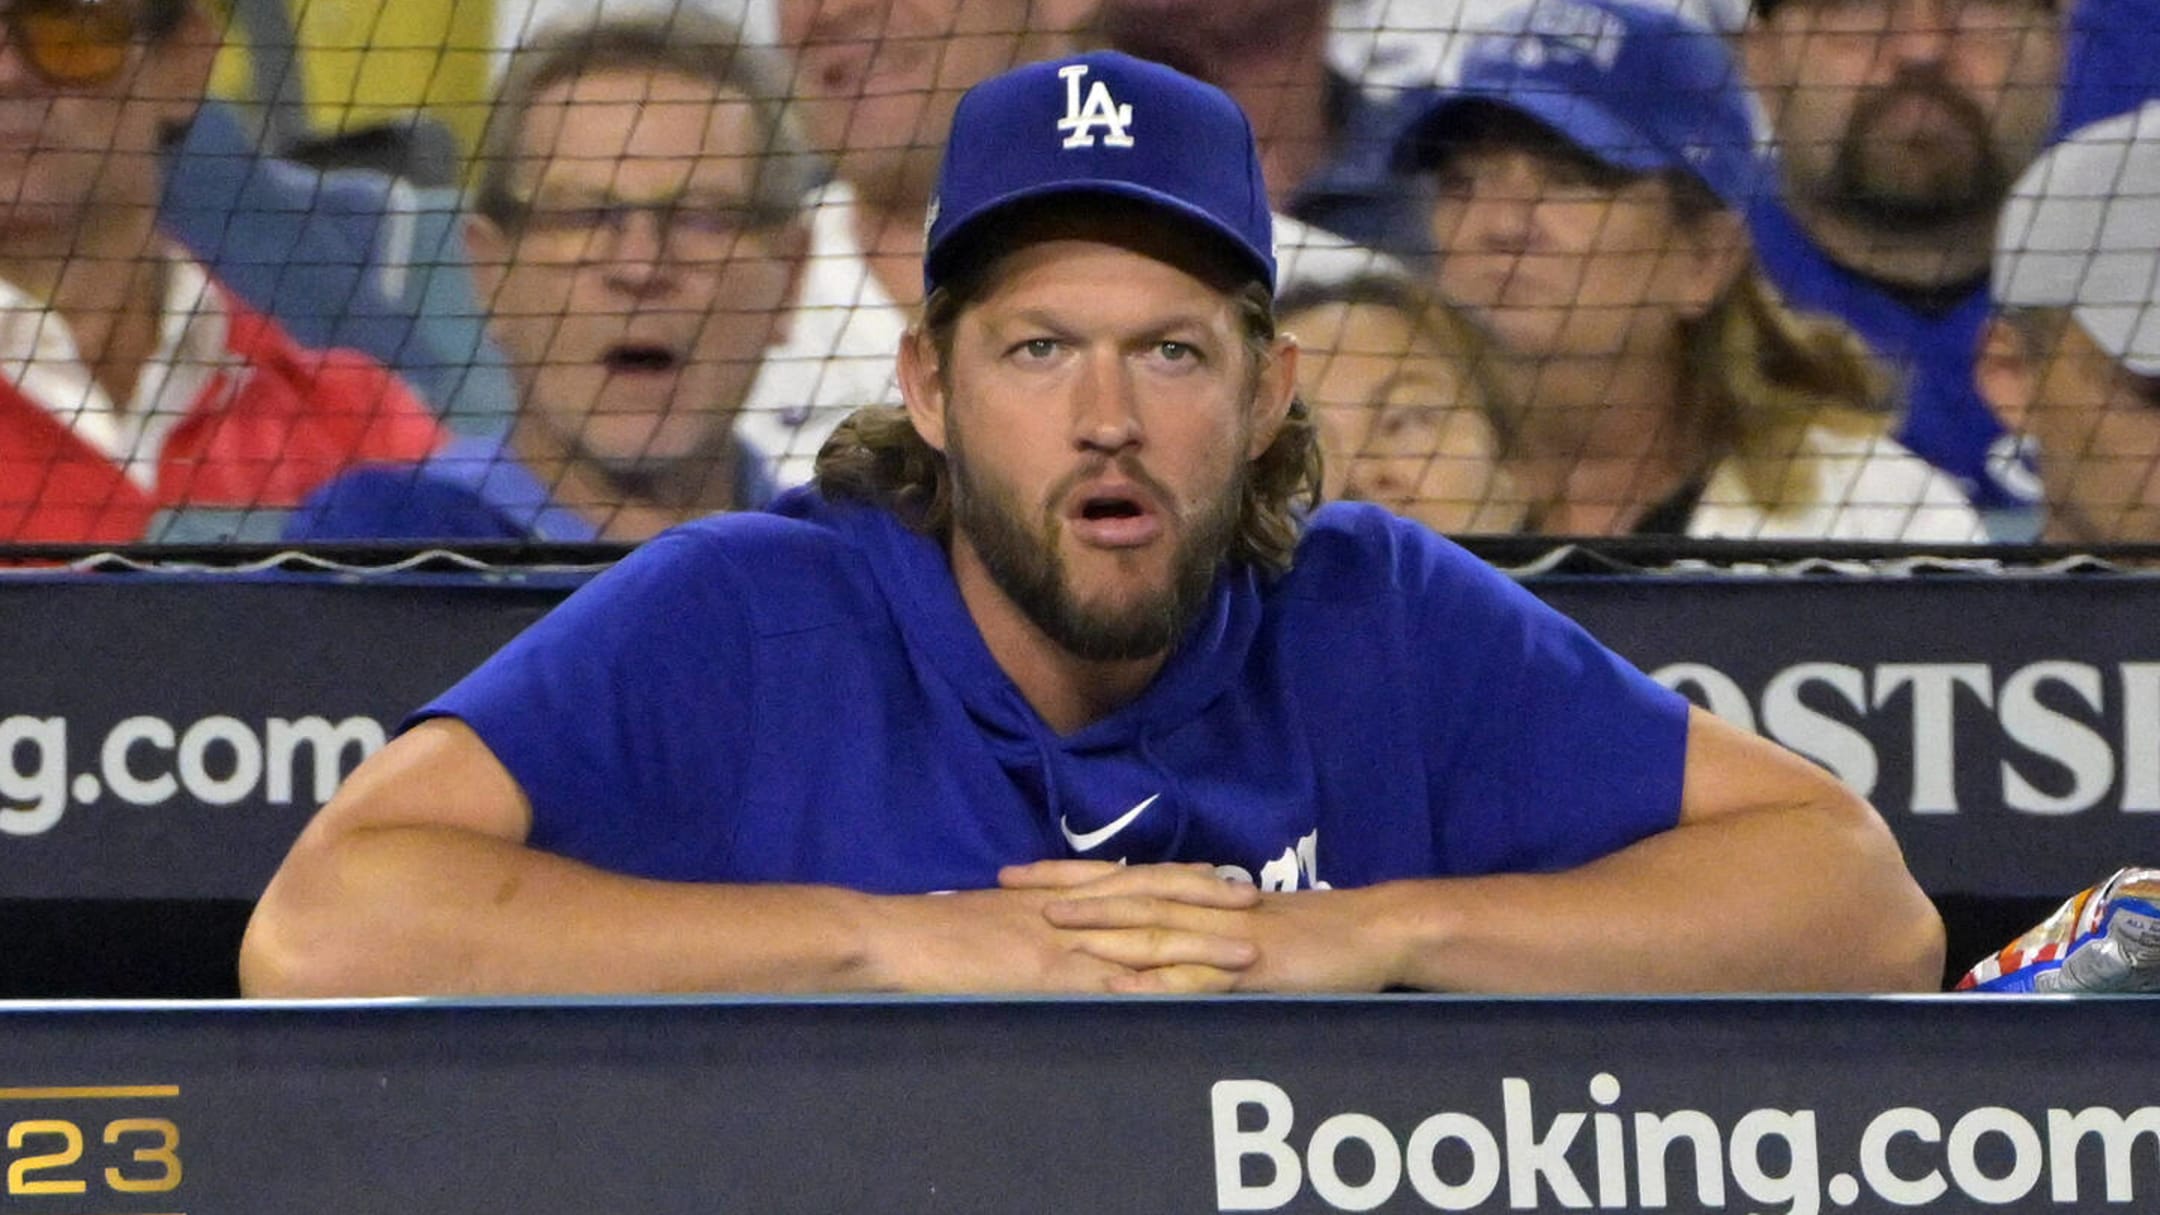 Clayton Kershaw re-signs to Los Angeles Dodgers on $20M, 1-year deal